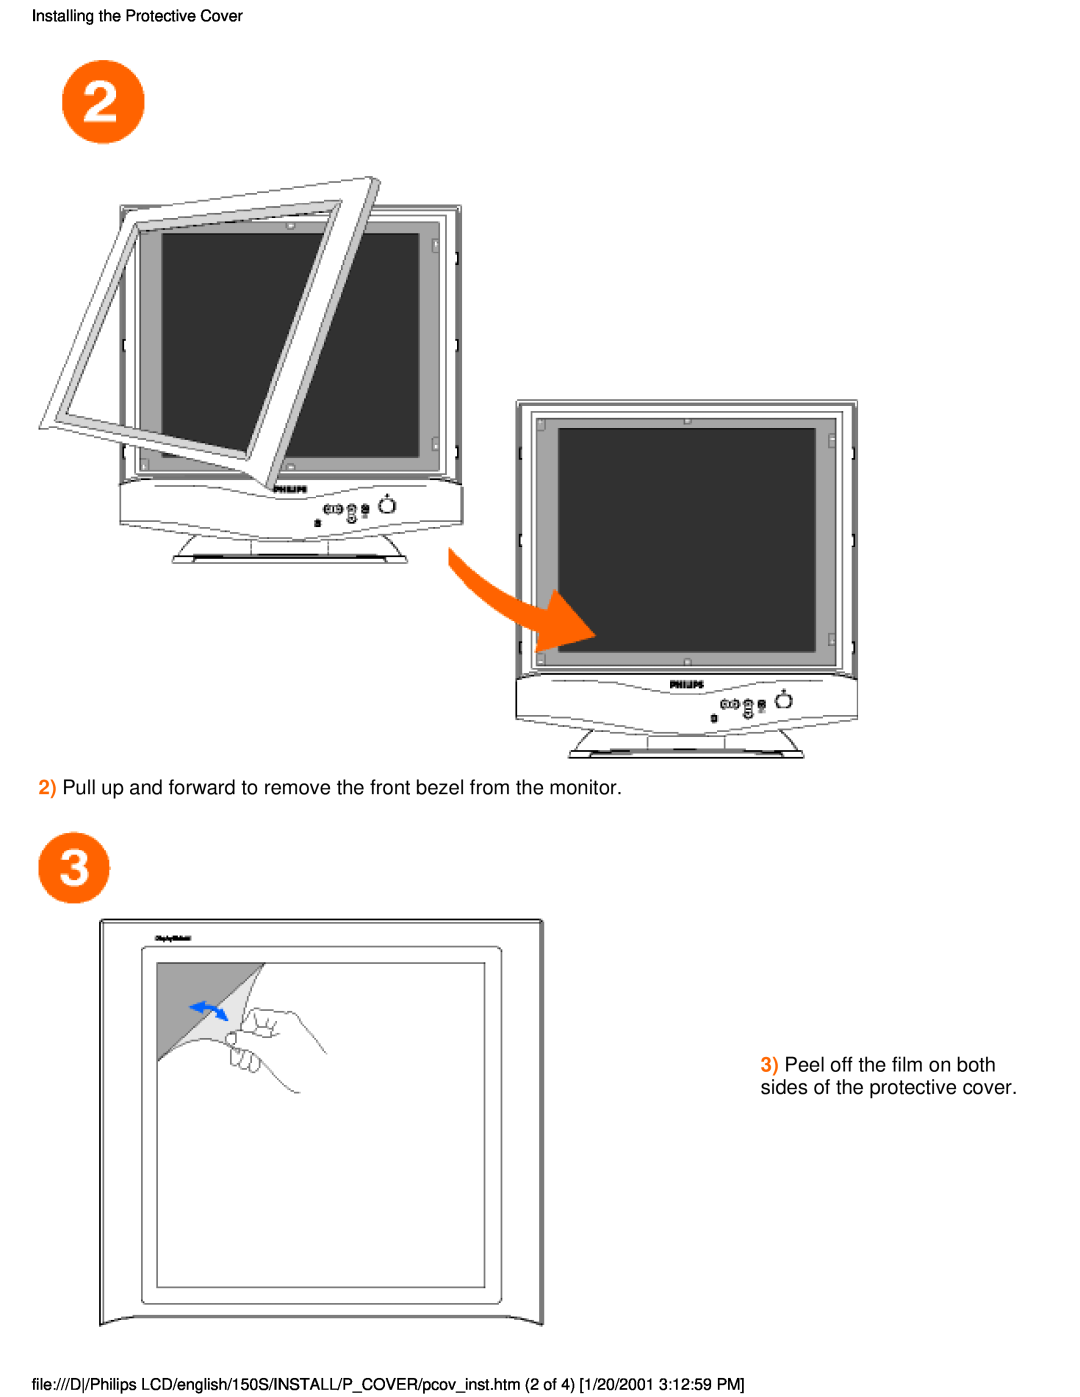 Philips 150S user manual Pull up and forward to remove the front bezel from the monitor, Installing the Protective Cover 